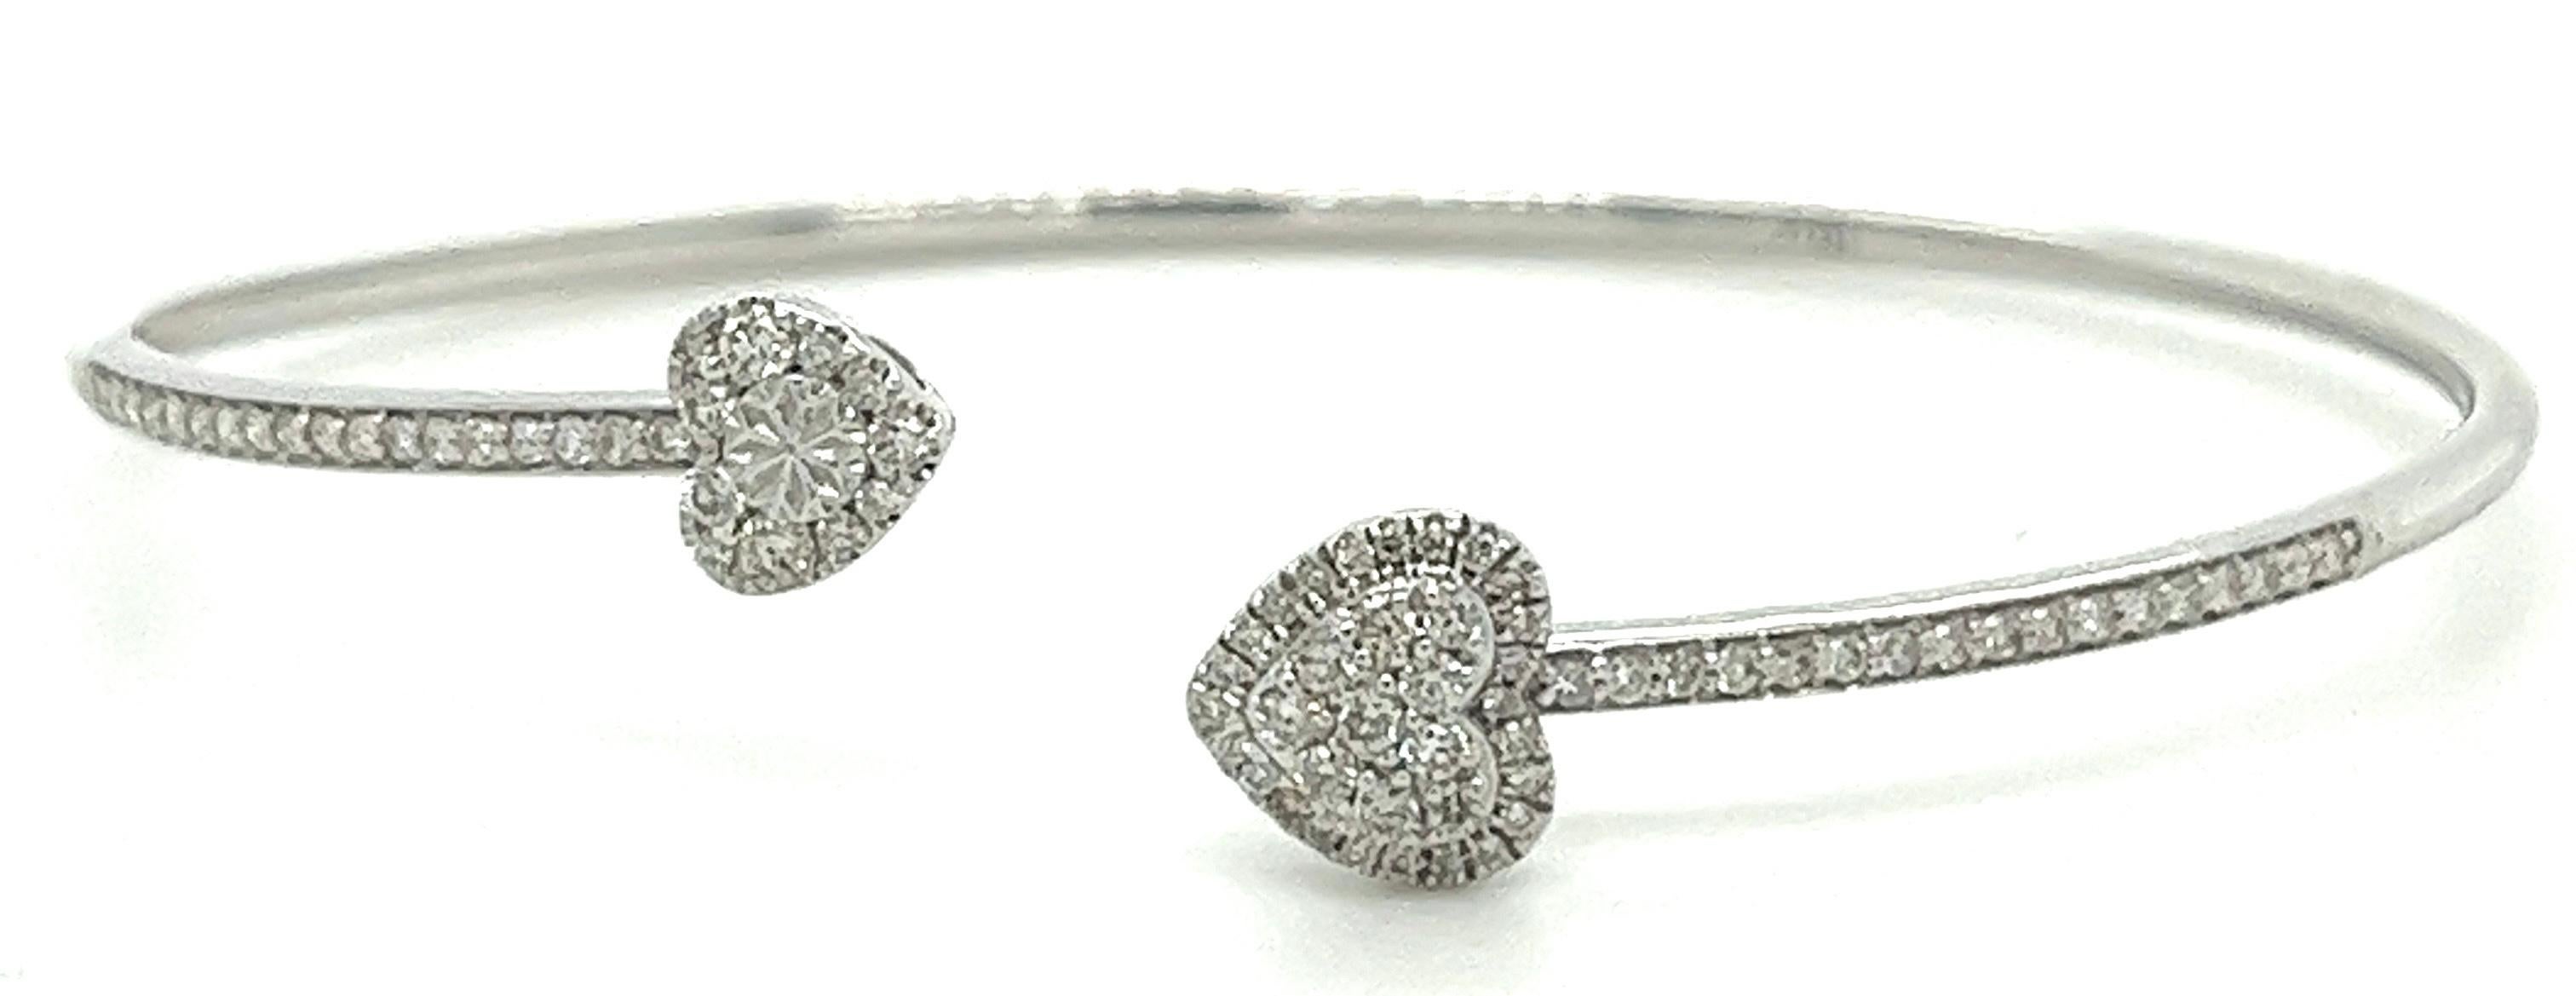 18K White Gold Diamond Heart Bracelet 
18K White Gold - 5.35 GM
81 Diamonds - 0.57 CT

With its timeless design and impeccable craftsmanship, Althoff Jewelry diamond bracelet features a captivating blend of 18K white gold and sparkling